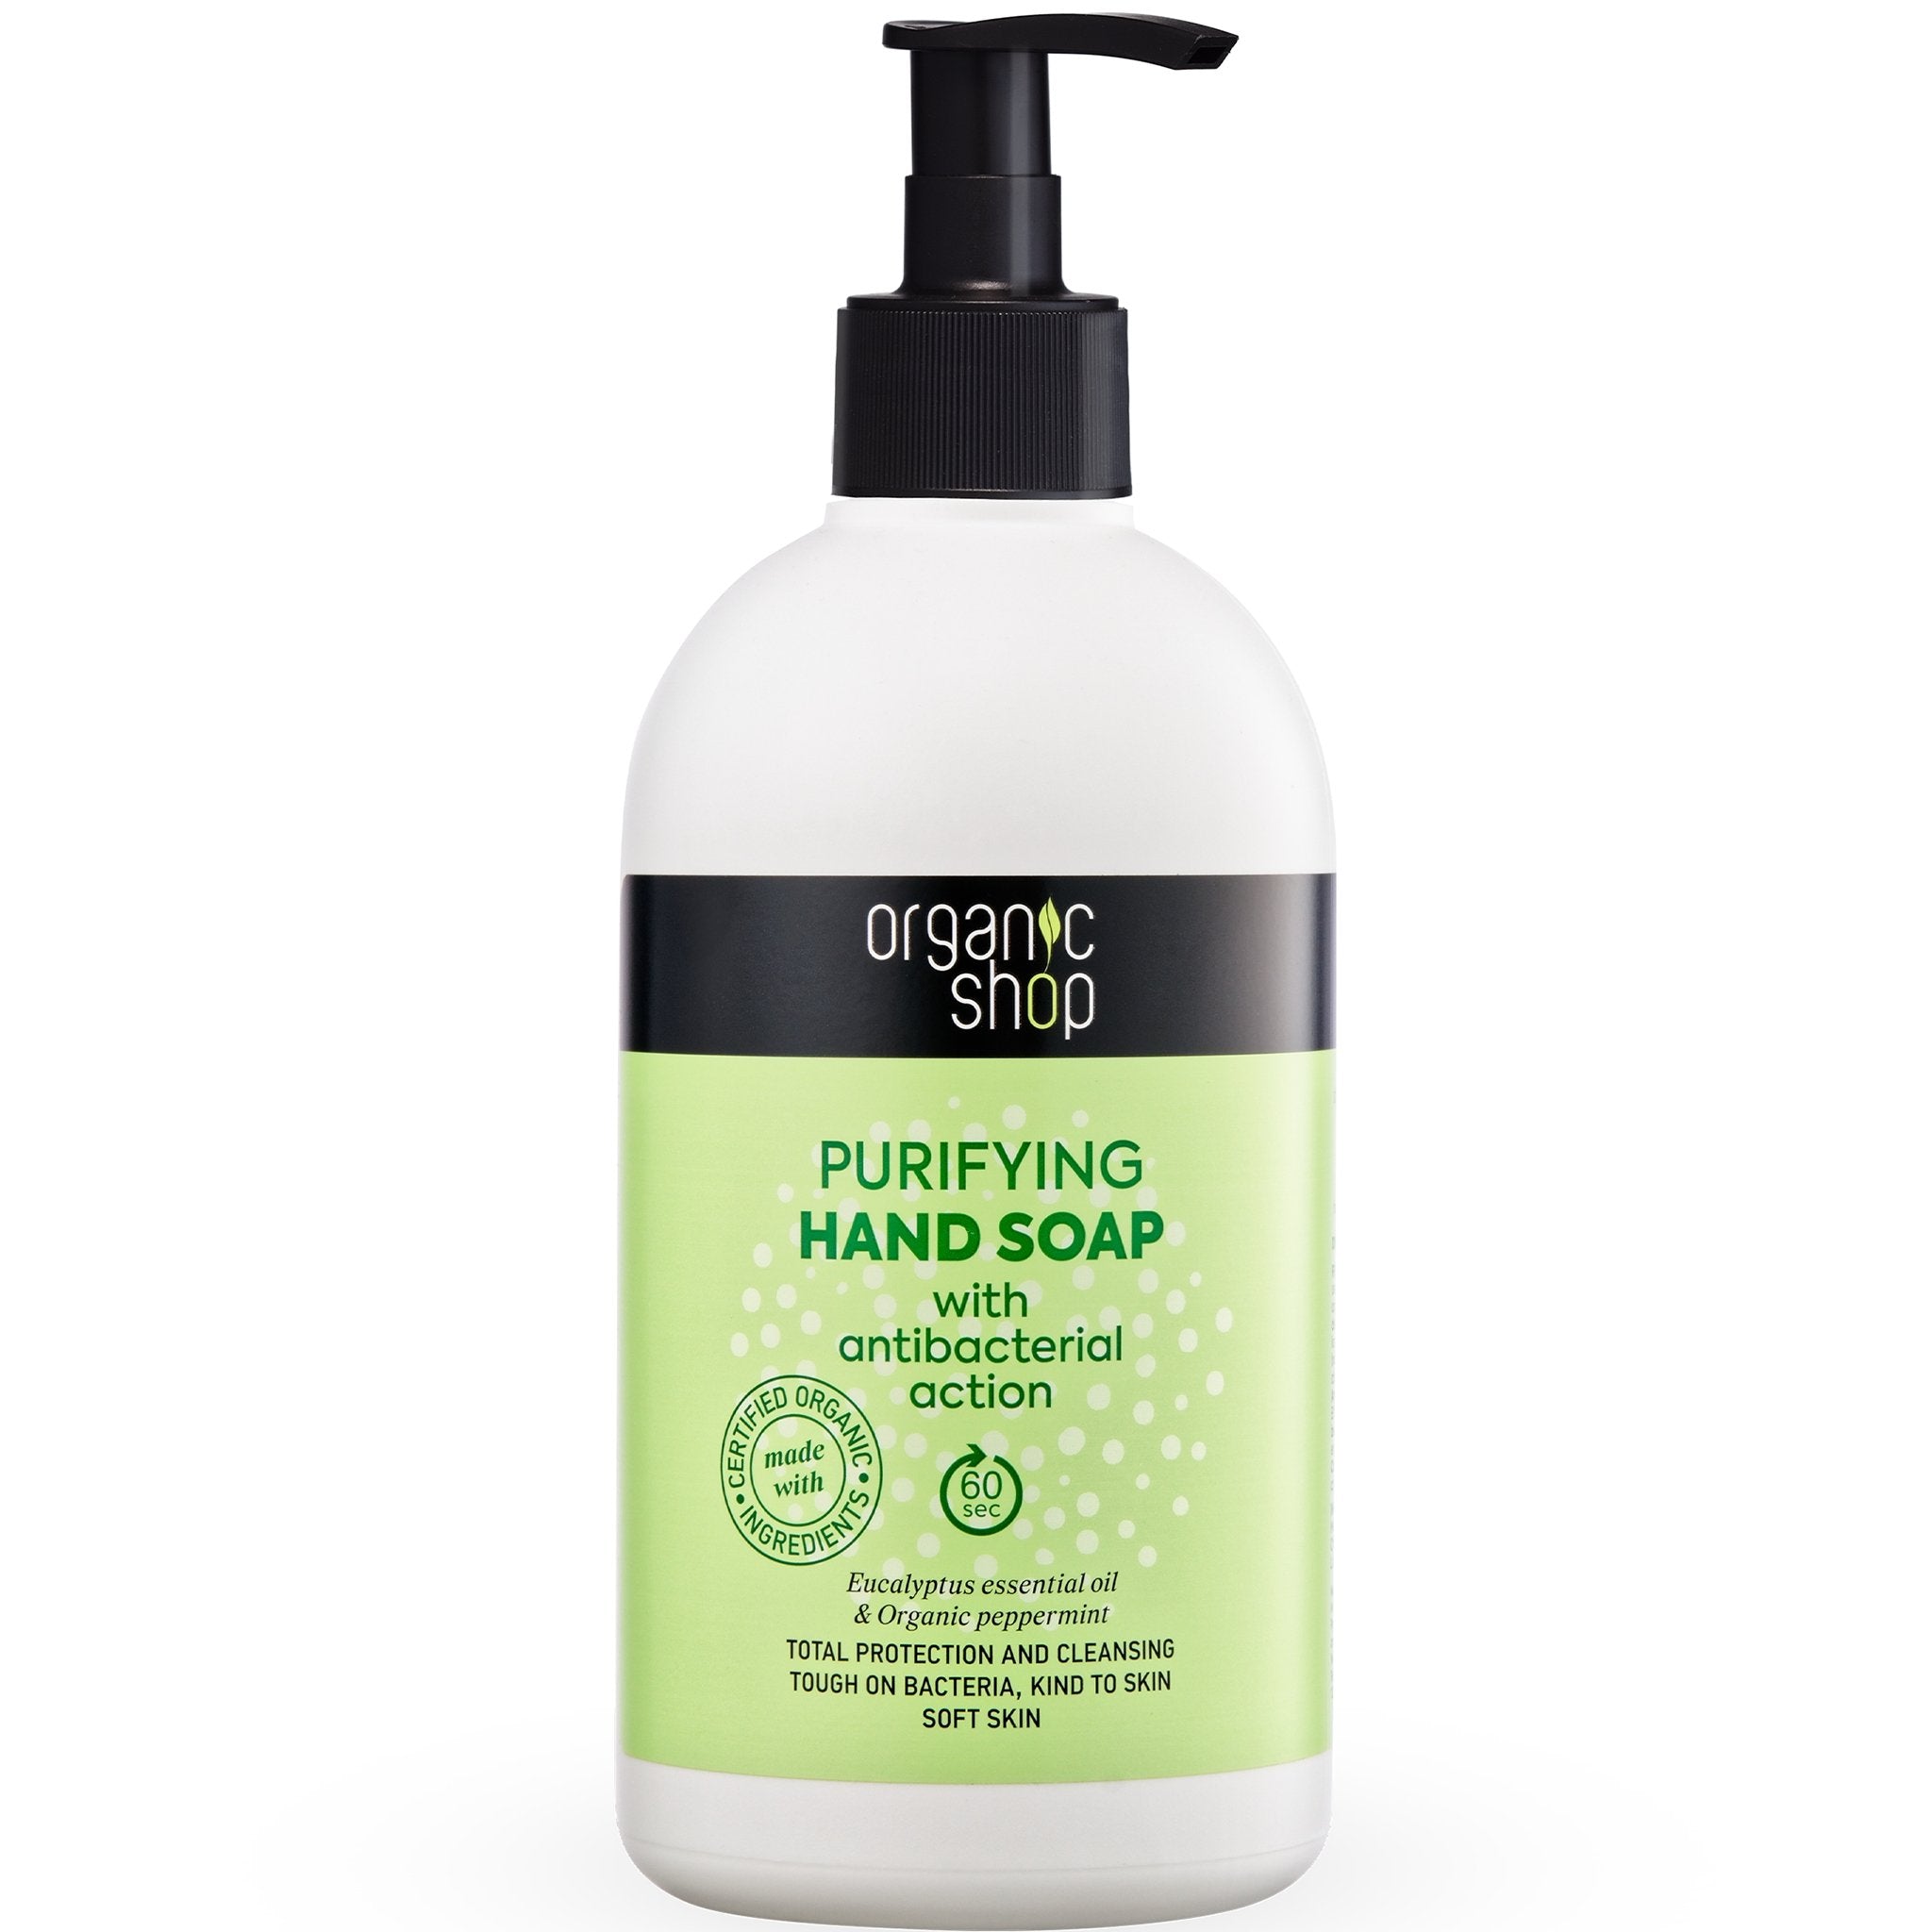 Purifying Hand Soap with Antibacterial Action - mypure.co.uk